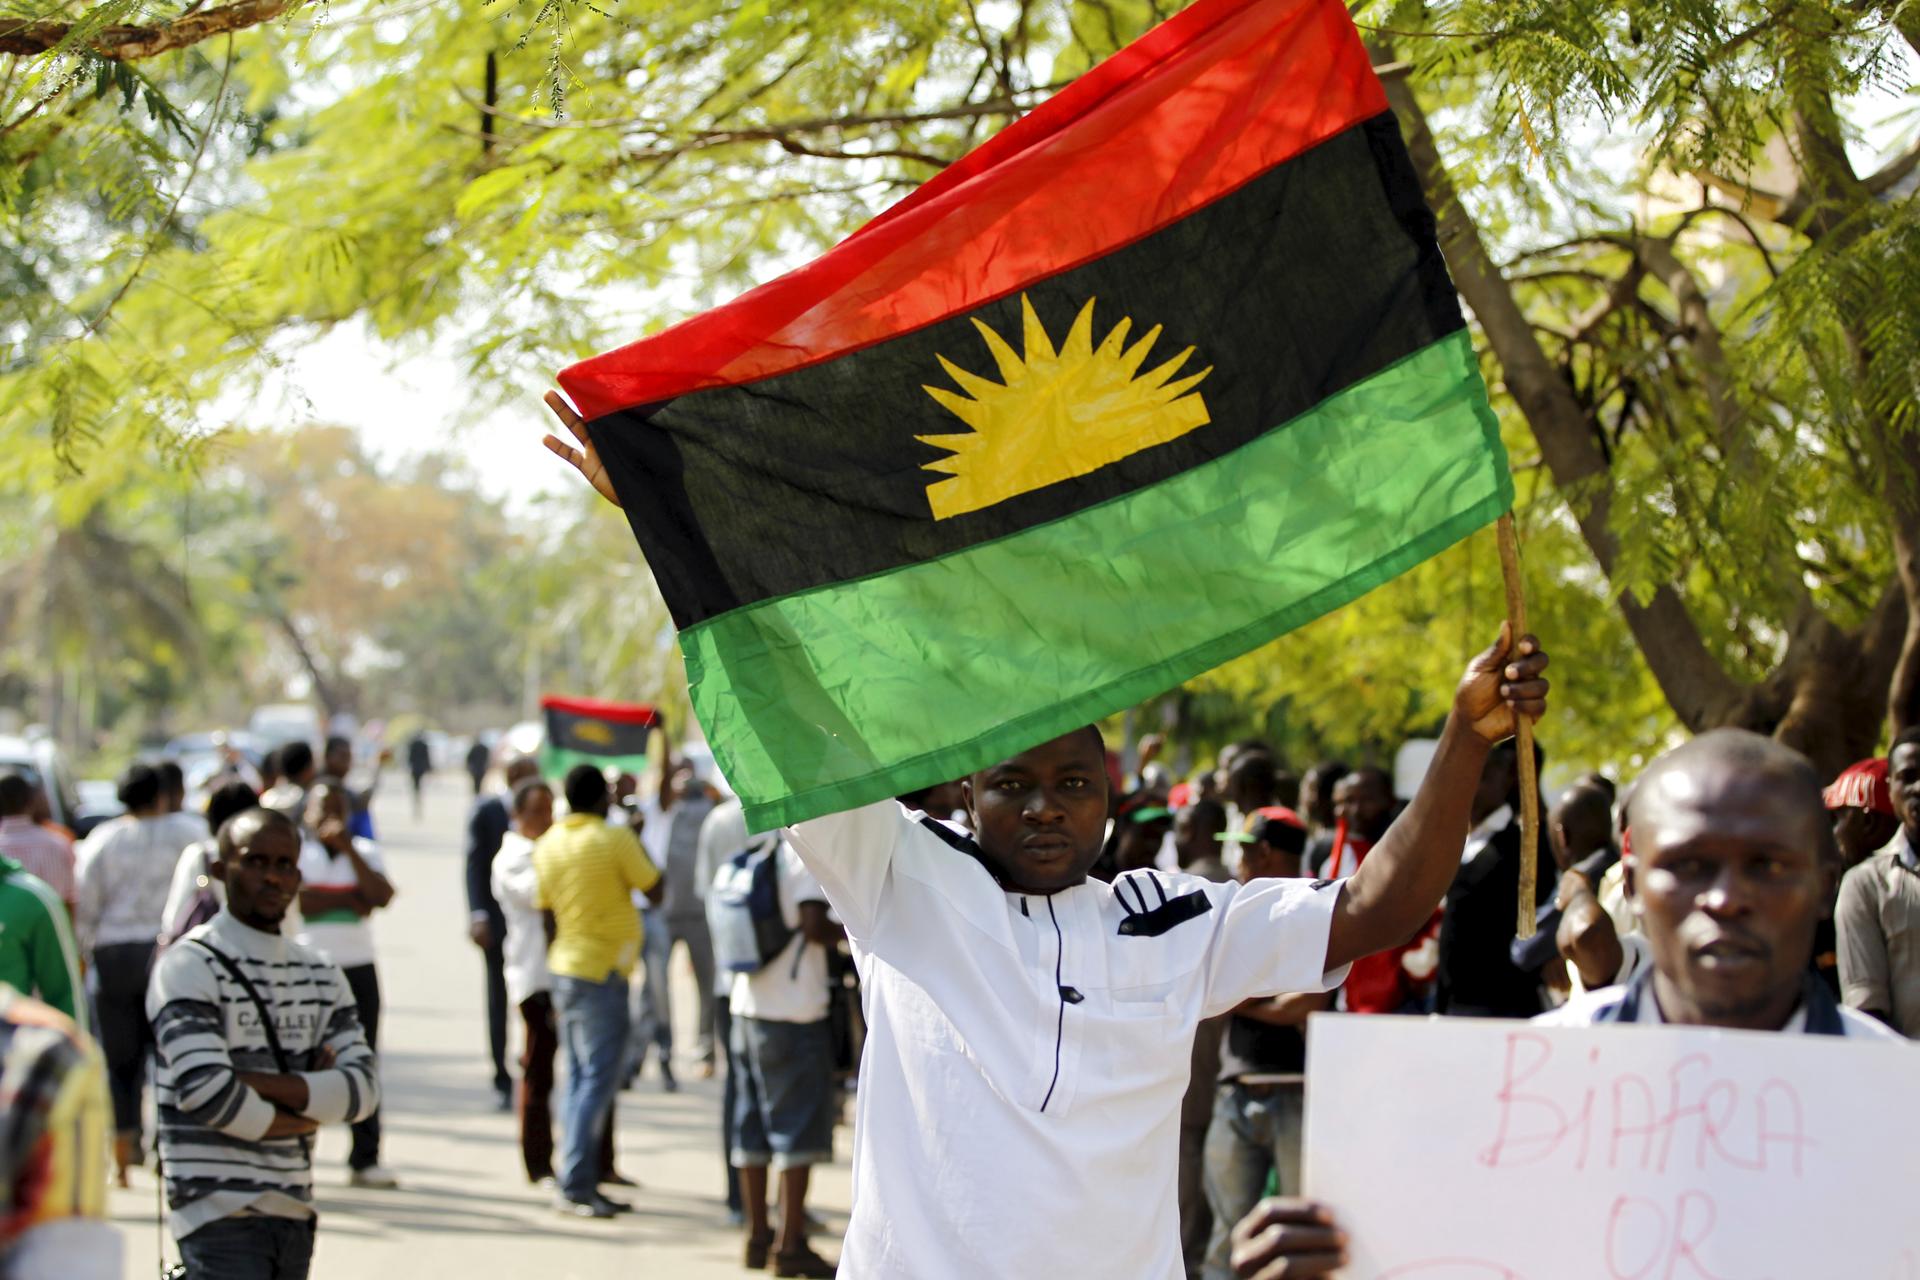 A supporter of Indigenous People of Biafra leader Nnamdi Kanu holds a Biafra flag during a rally in support of Kanu, who was arrested on charges of criminal conspiracy and belonging to an illegal societyAbuja, Nigeria December 1, 2015.